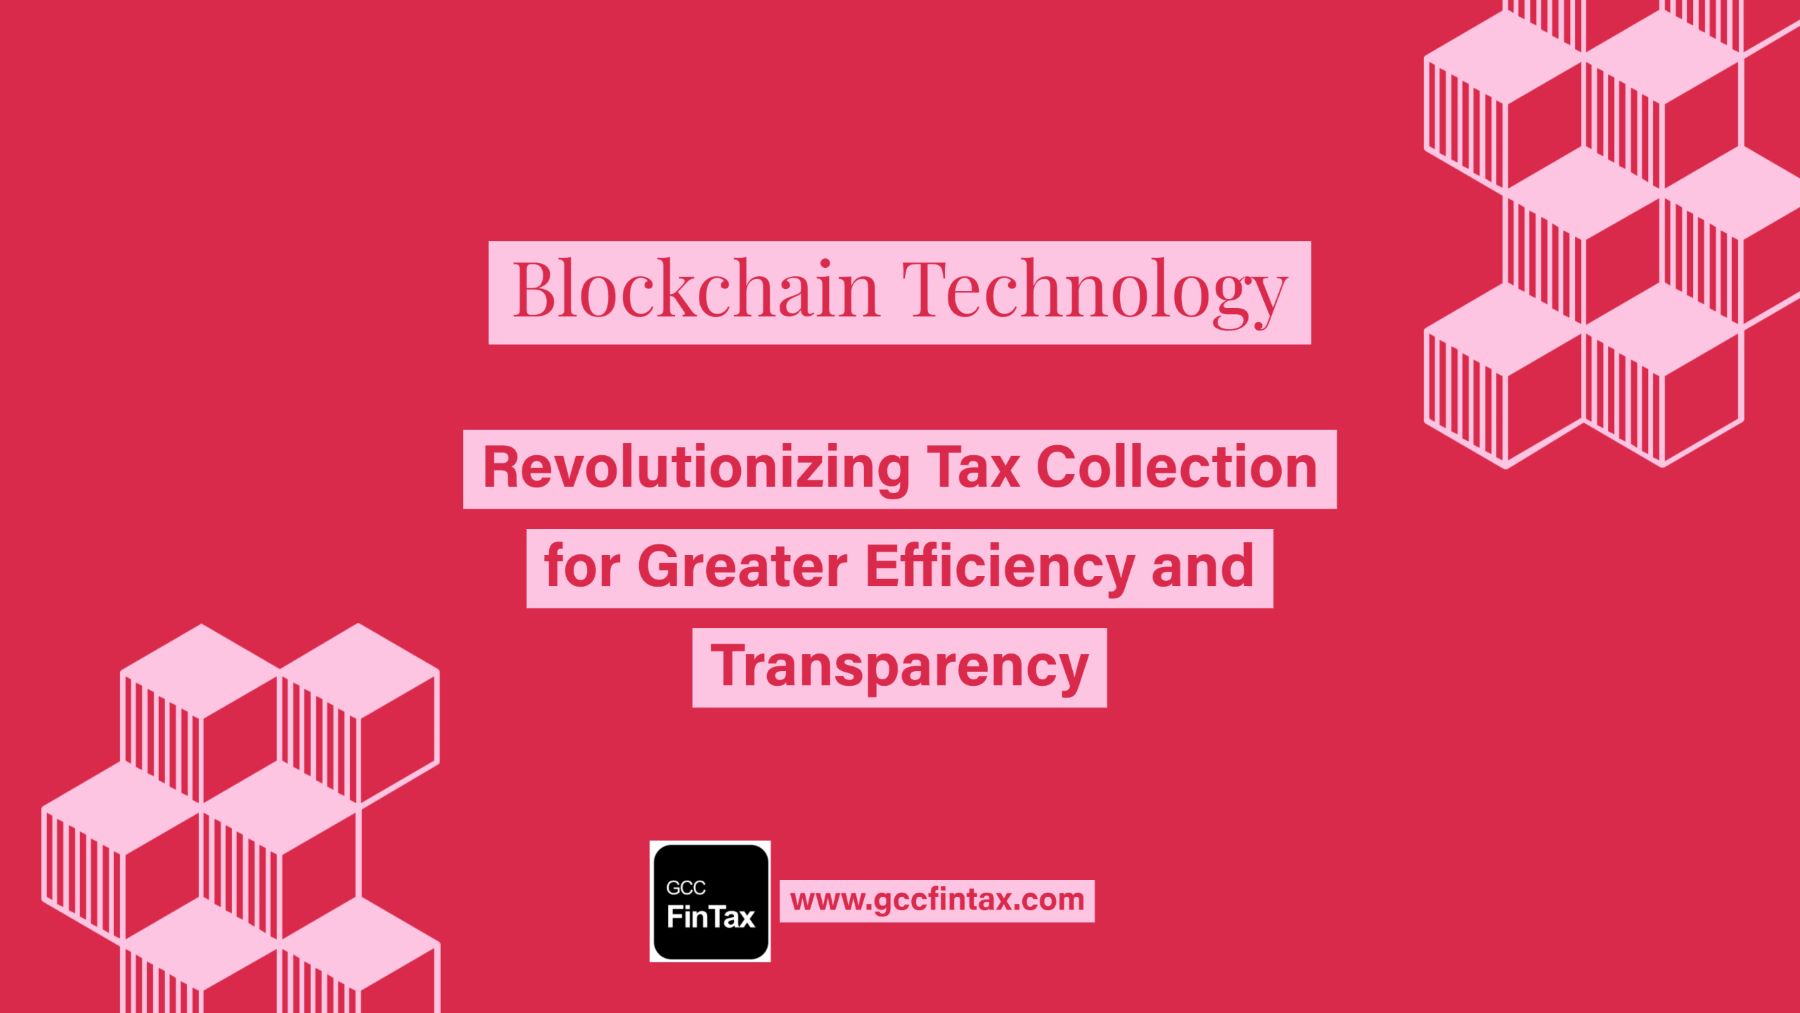 Blockchain Technology: Revolutionizing Tax Collection for Greater Efficiency and Transparency